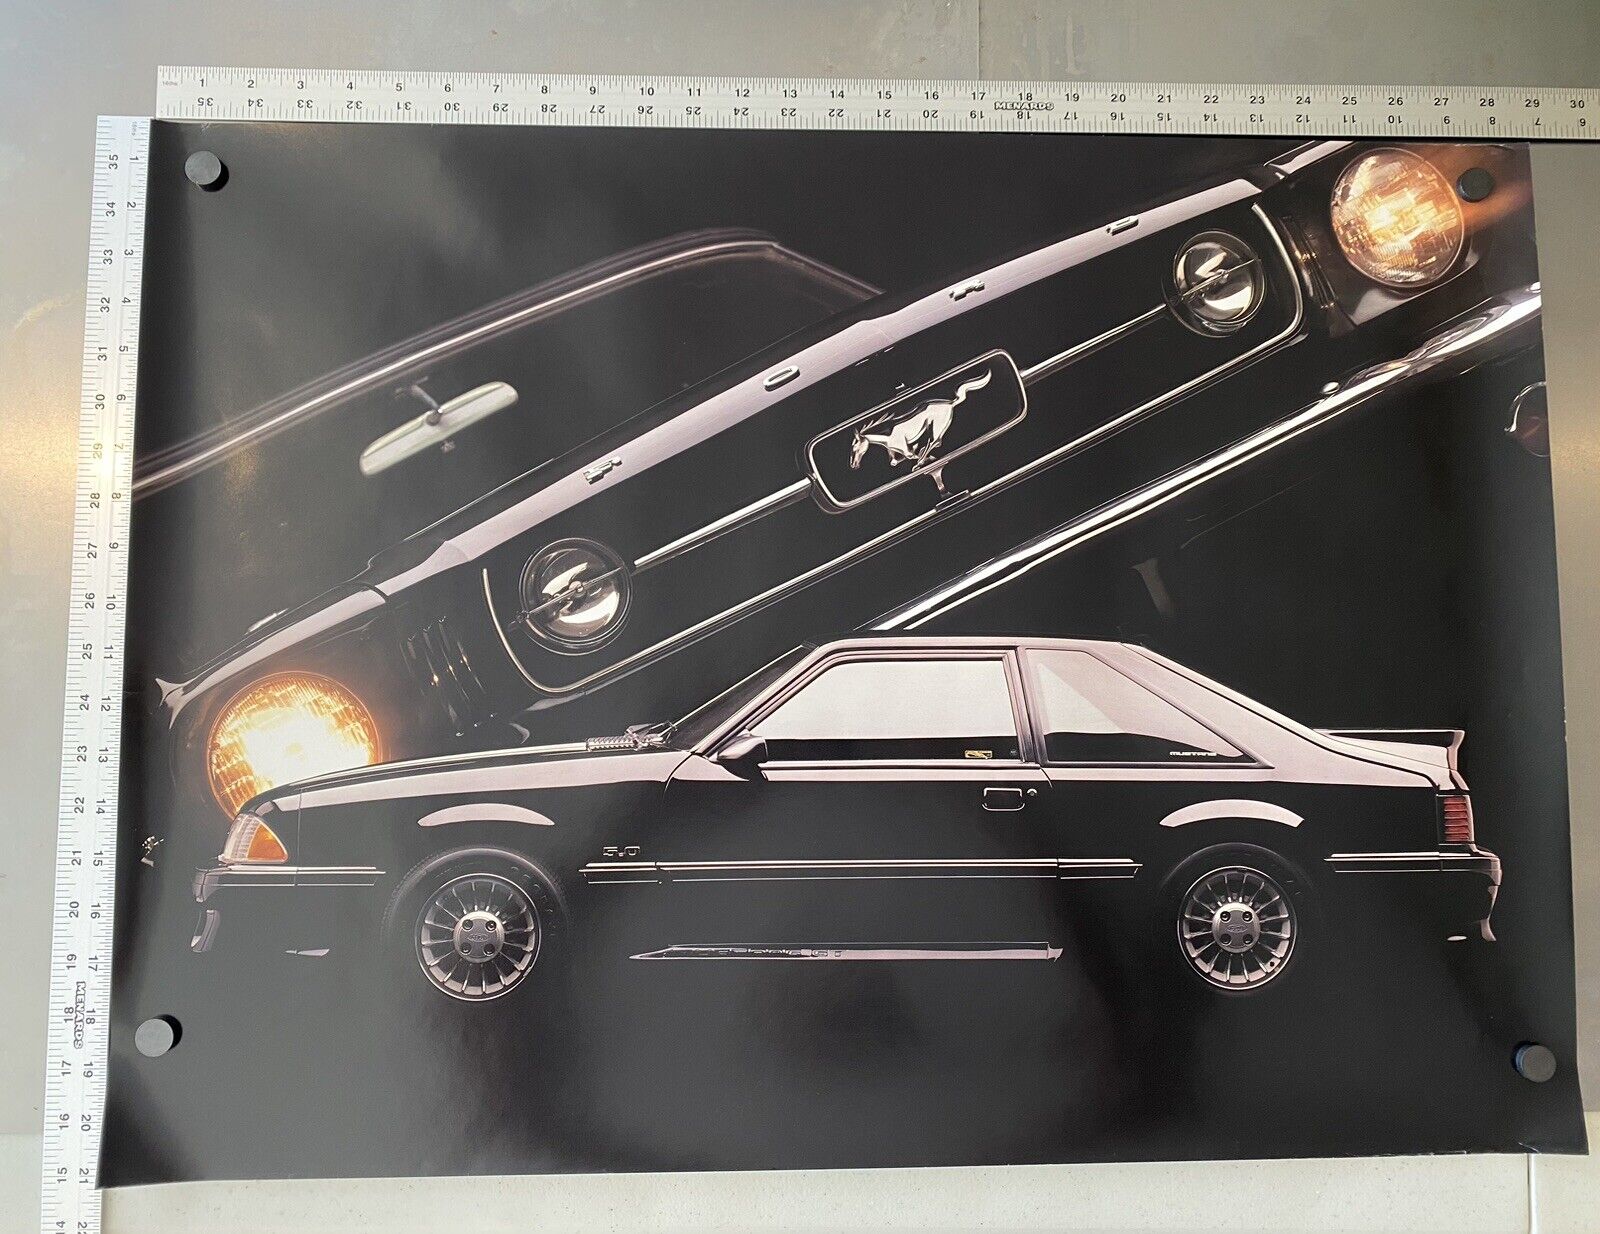 Ford MUSTANG GT 5.0 Poster ORIGINAL VINTAGE (1990) With 1964.5 Mustang